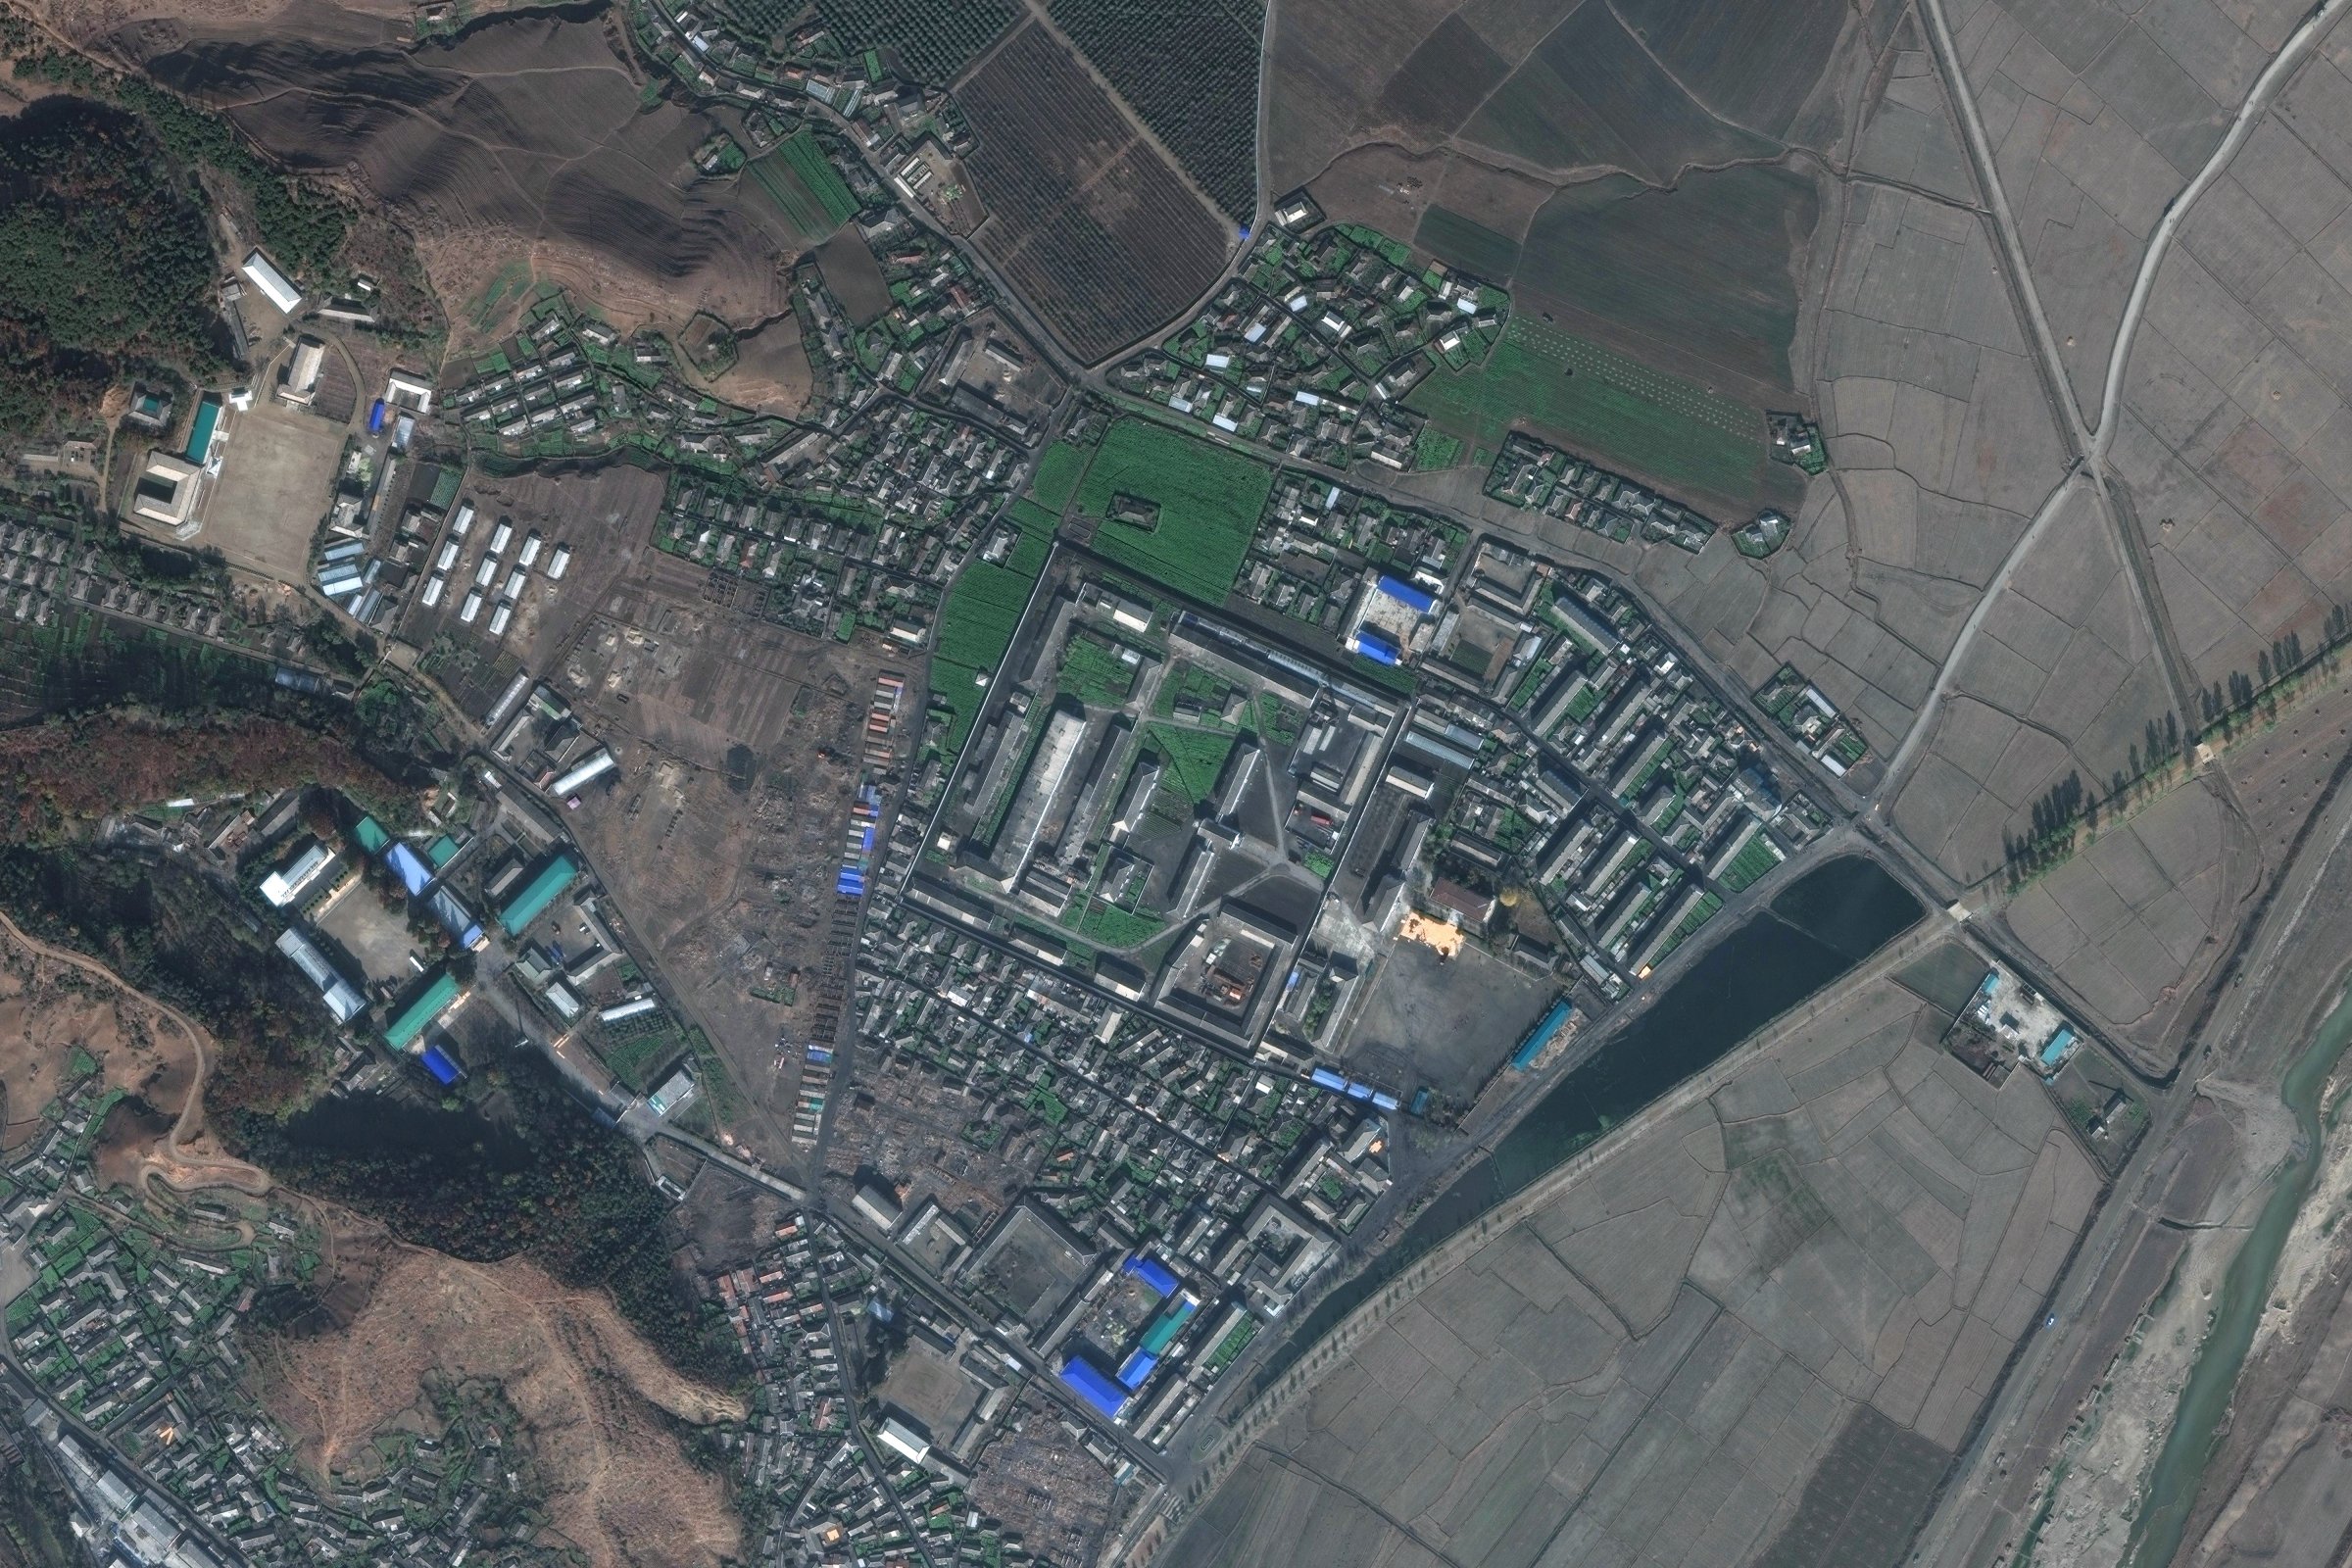 DigitalGlobe satellite imagery of Hamhung concentration camp (Kyo-hwa-so No. 15) - a reeducation camp in North Korea.